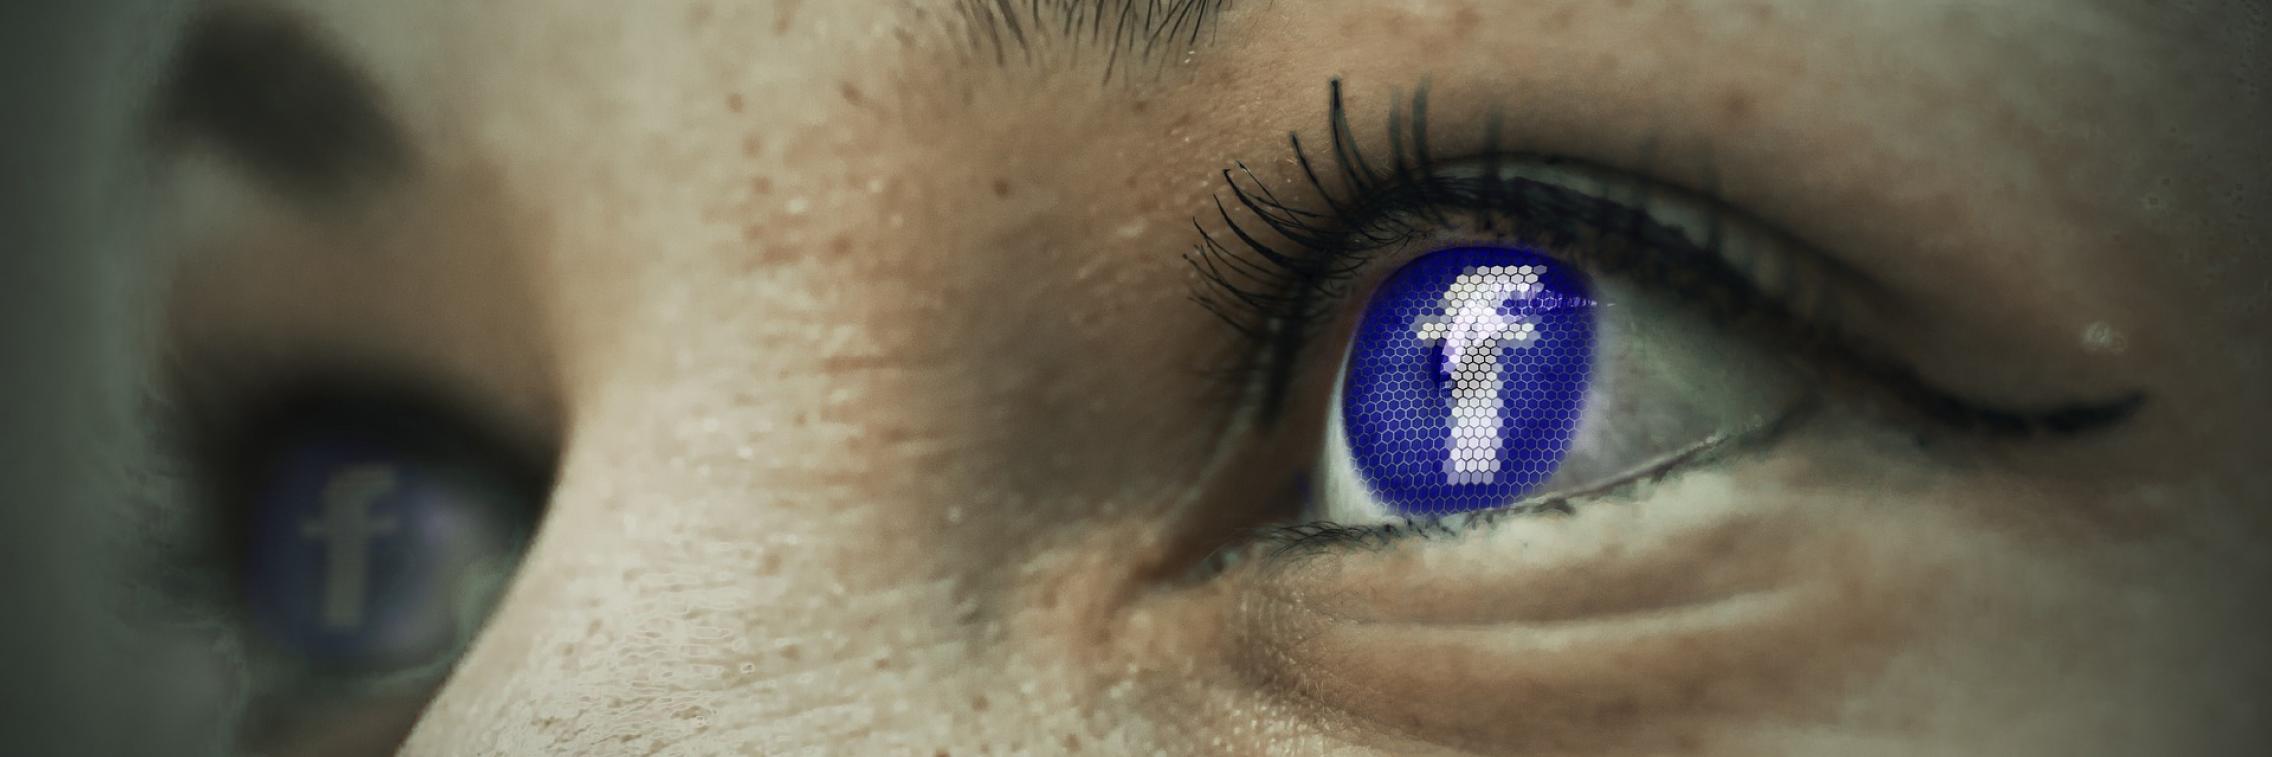 A close up with the facebook logo in the eye